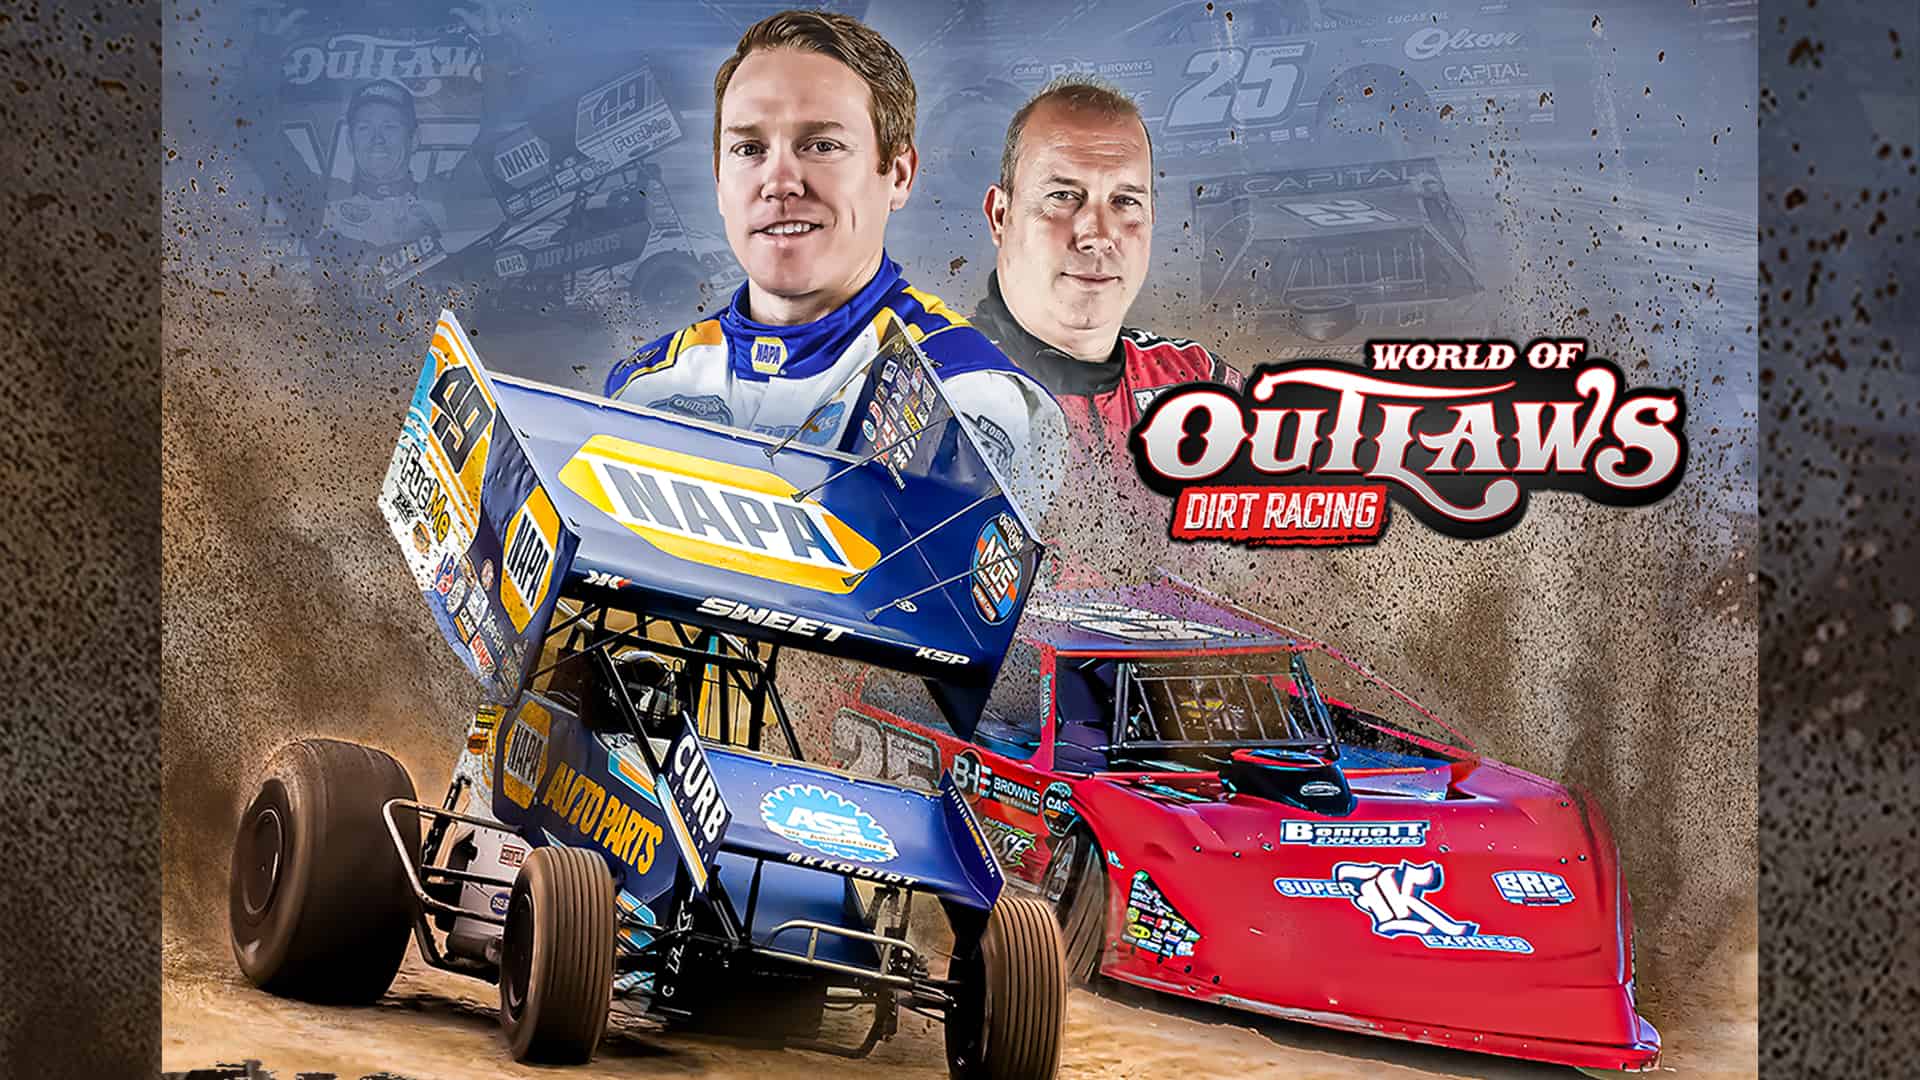 Everything you need to know about World of Outlaws Dirt Racing Traxion